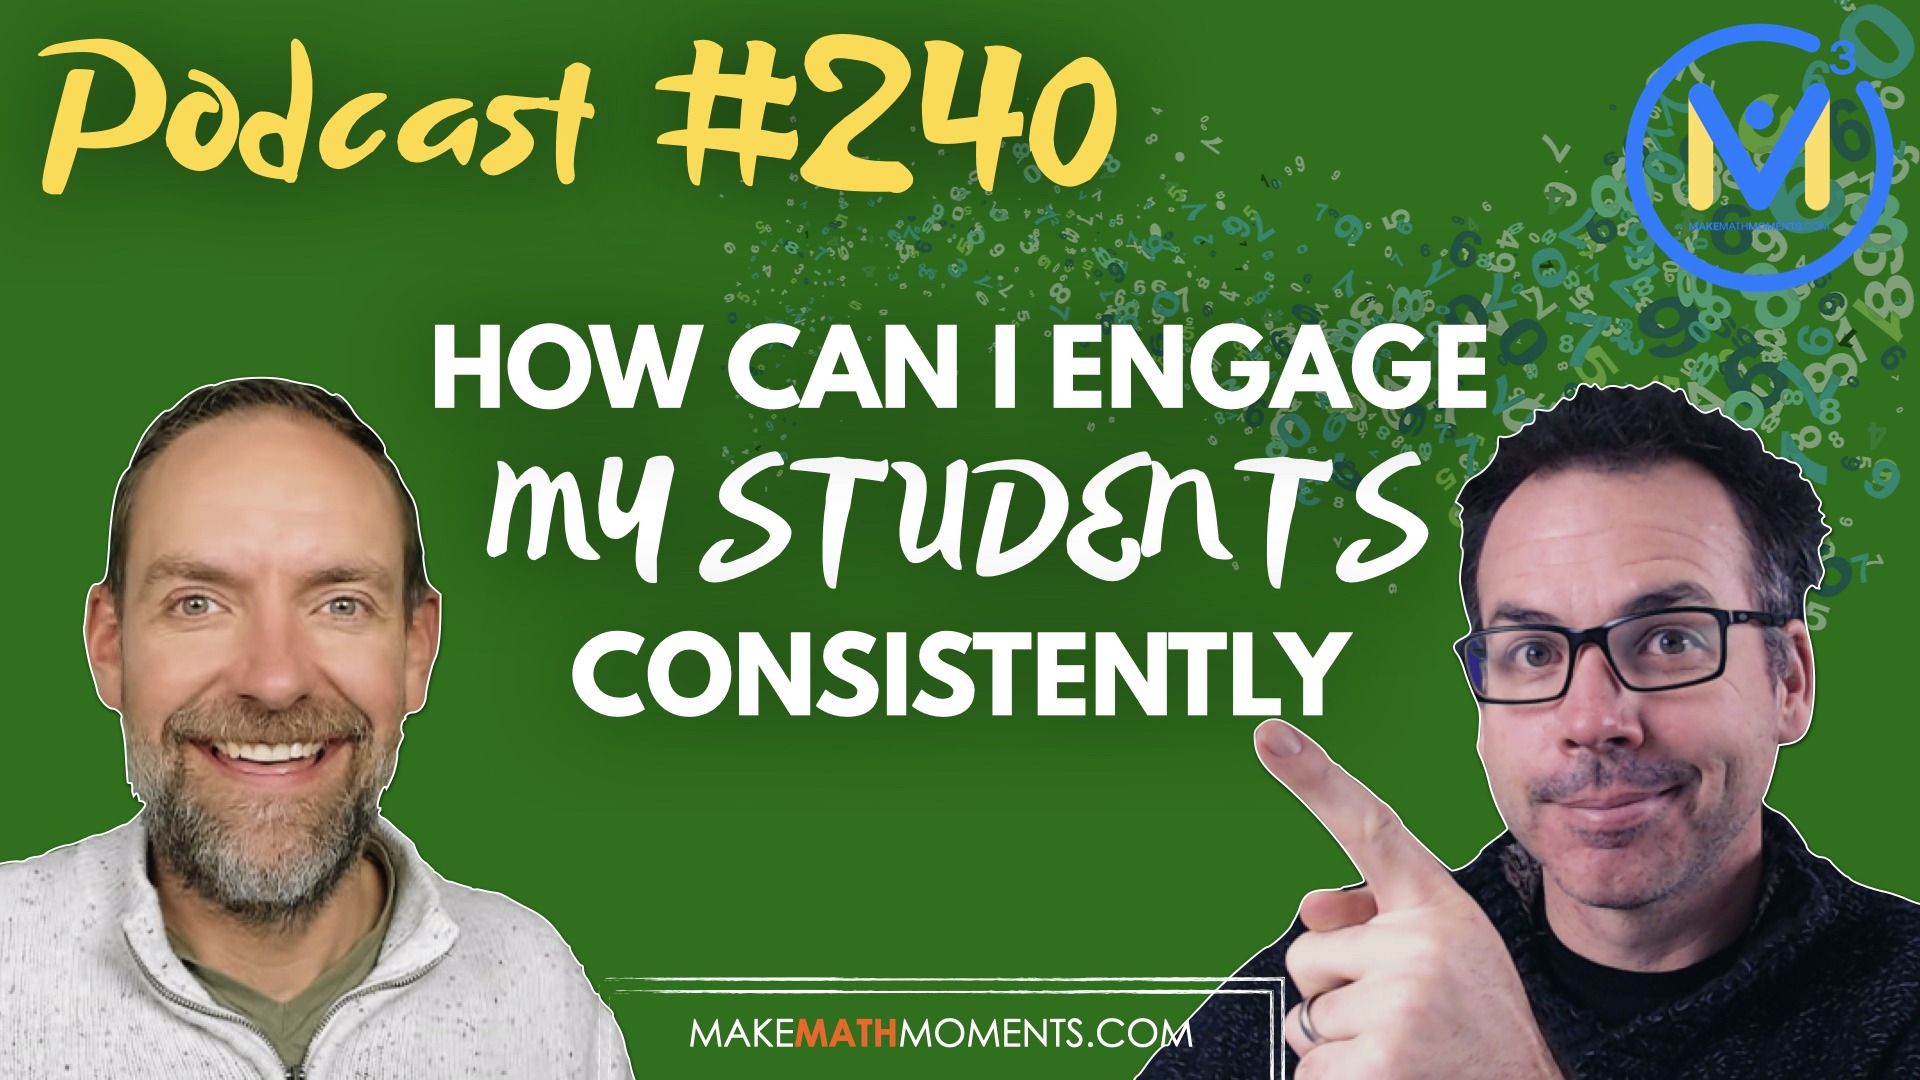 Episode #240: How Can I Engage My Students Consistently?